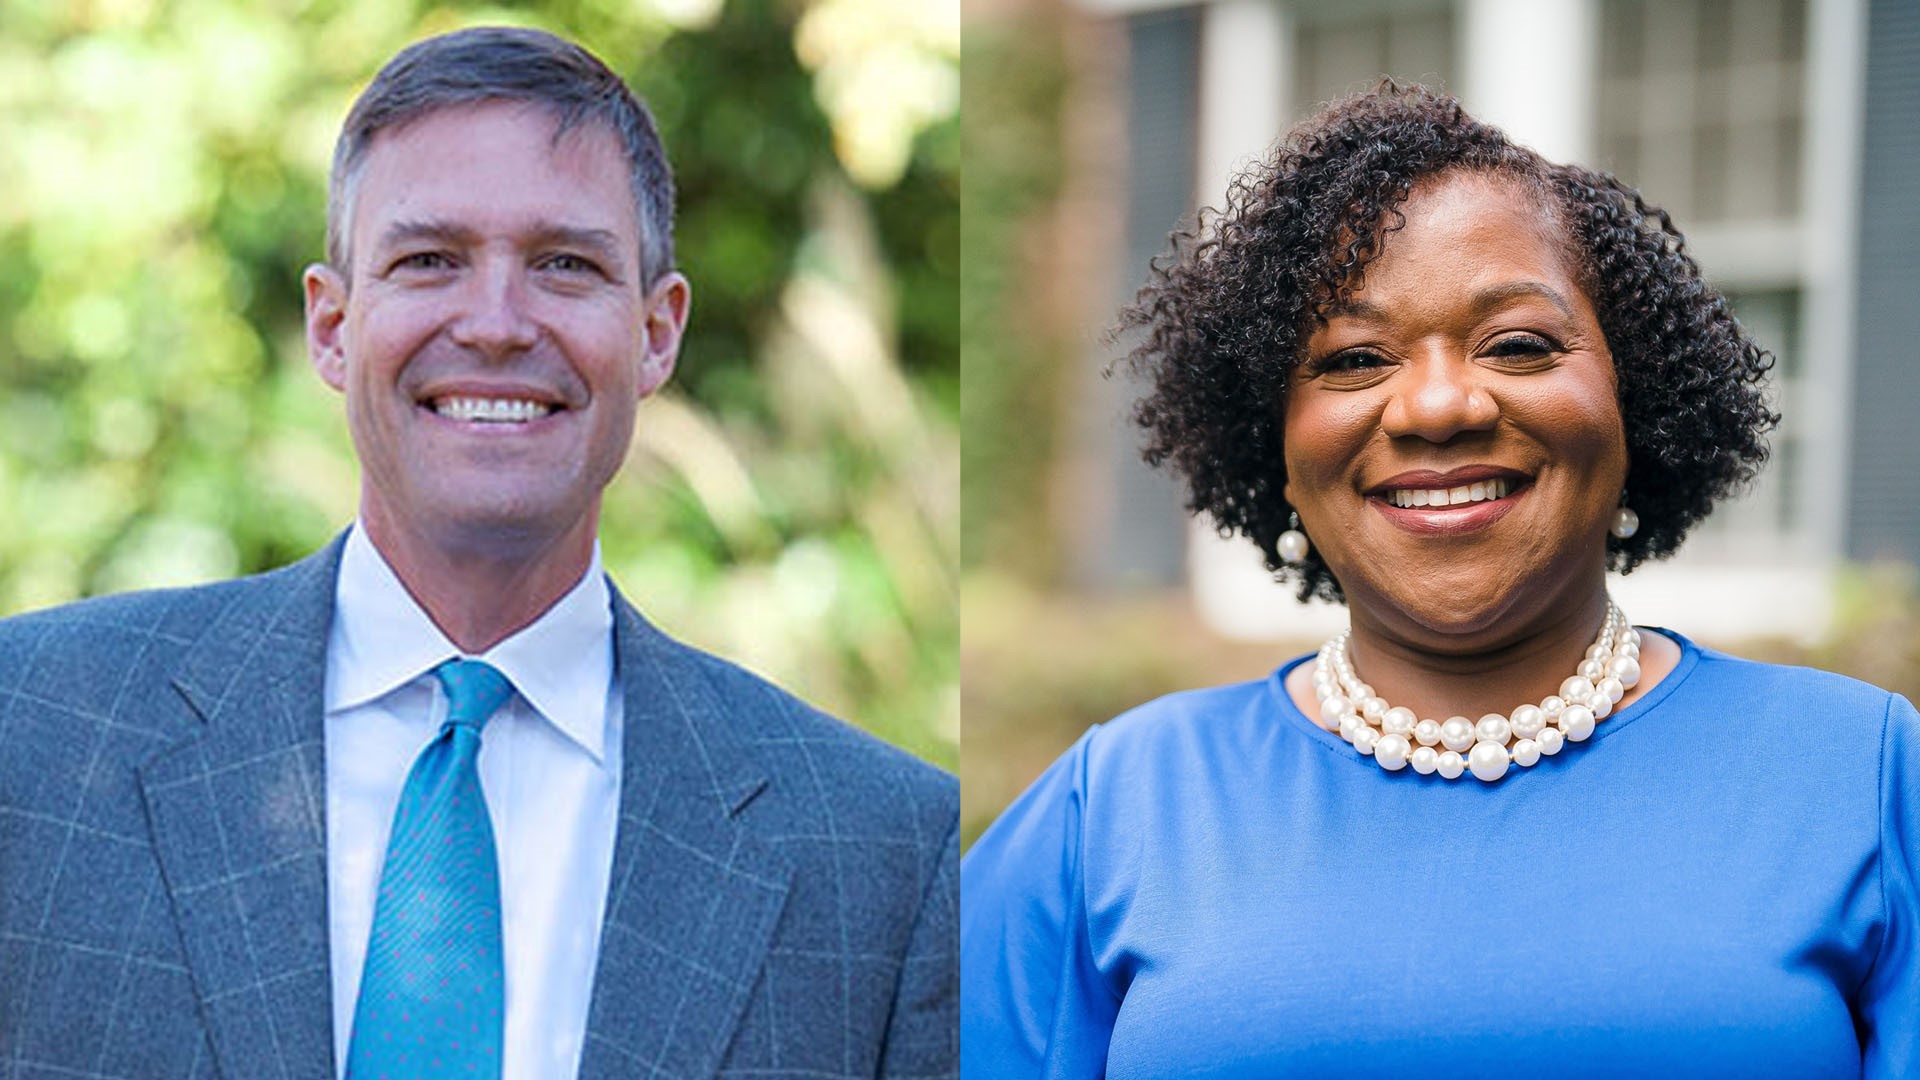 Columbia mayoral candidates Daniel Rickenmann and Tameika Isaac Devine debated the issues  just six days before the race that will decide which one is the new mayor.